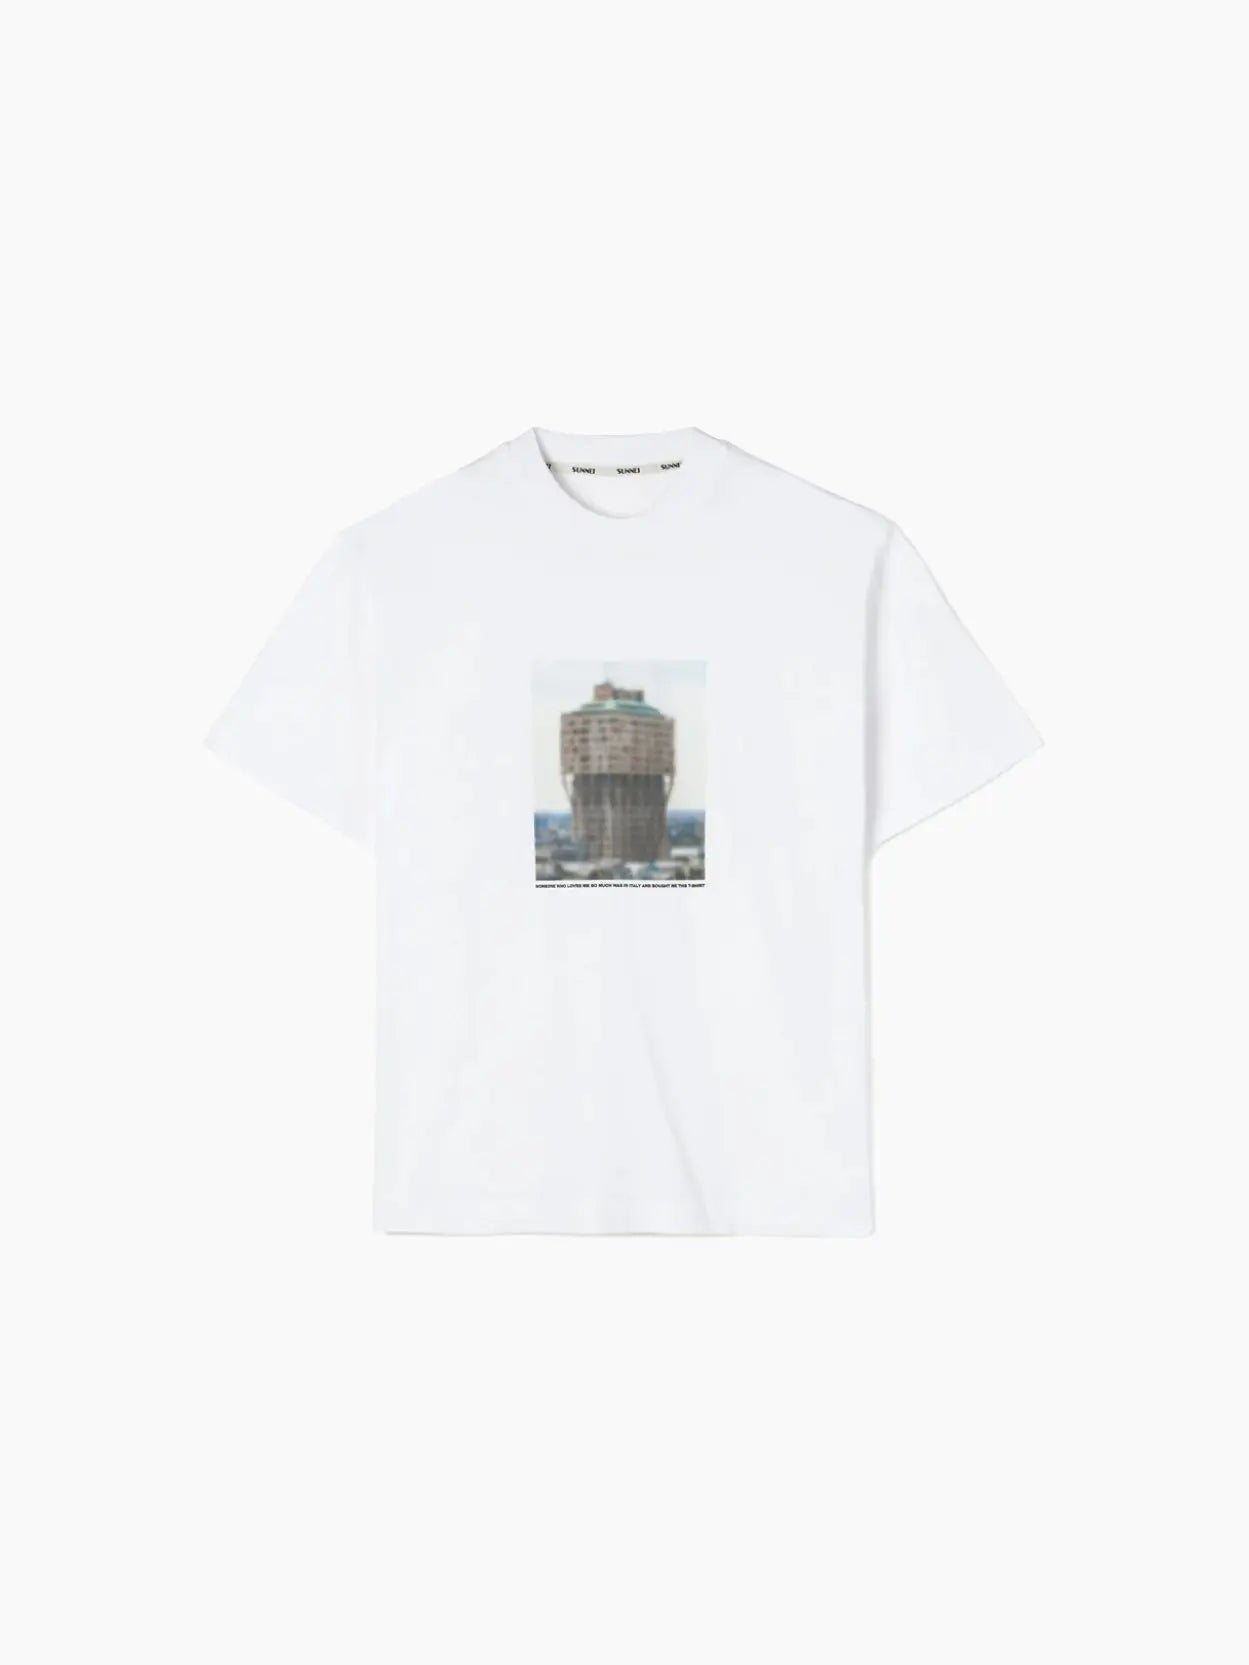 A Torre Velasca T-Shirt Re-Edition available at Bassalstore, featuring a central graphic image of a tall, cylindrical building situated by the water. The architectural structure is prominently displayed on the front of the shirt against the solid white background, capturing a Barcelona-inspired vibe. This stylish piece from Sunnei perfectly merges iconic architecture with contemporary fashion.